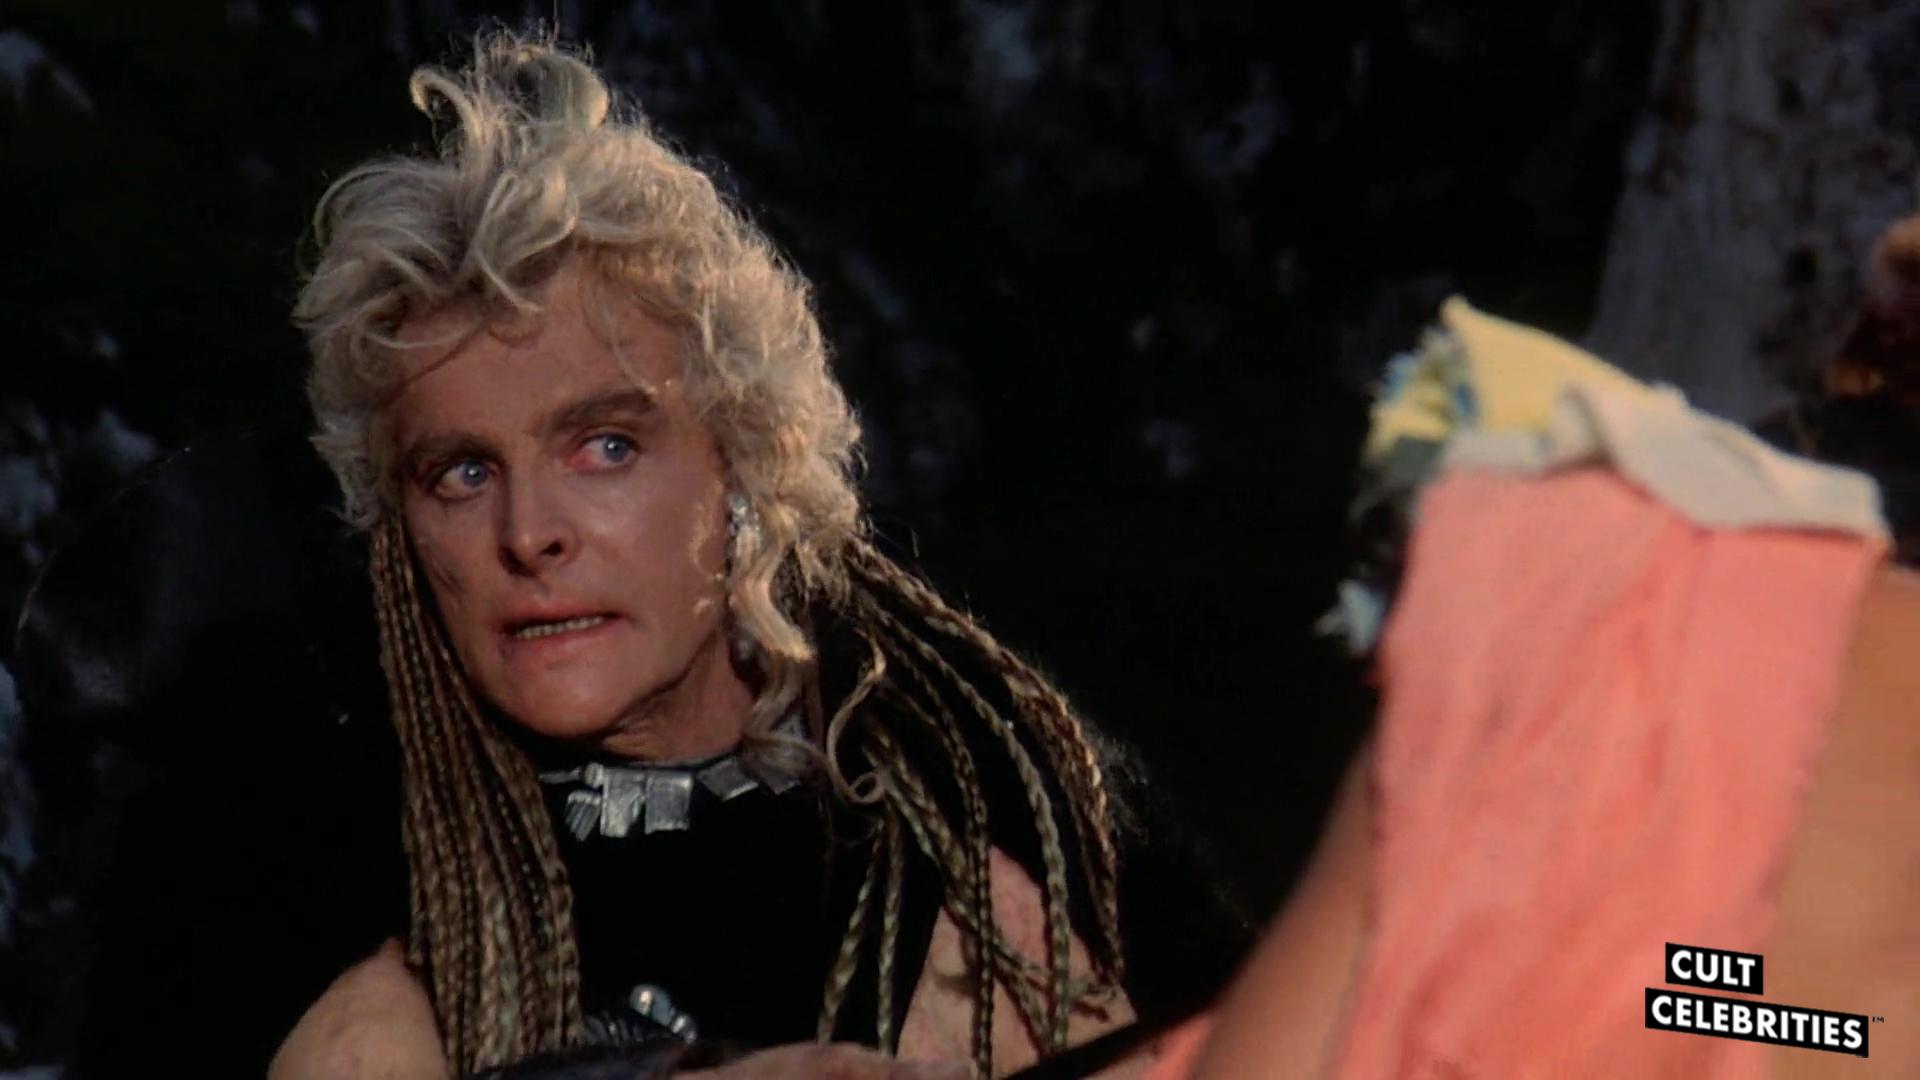 Richard Lynch in the 1987 sword-and-sorcery film The Barbarians.